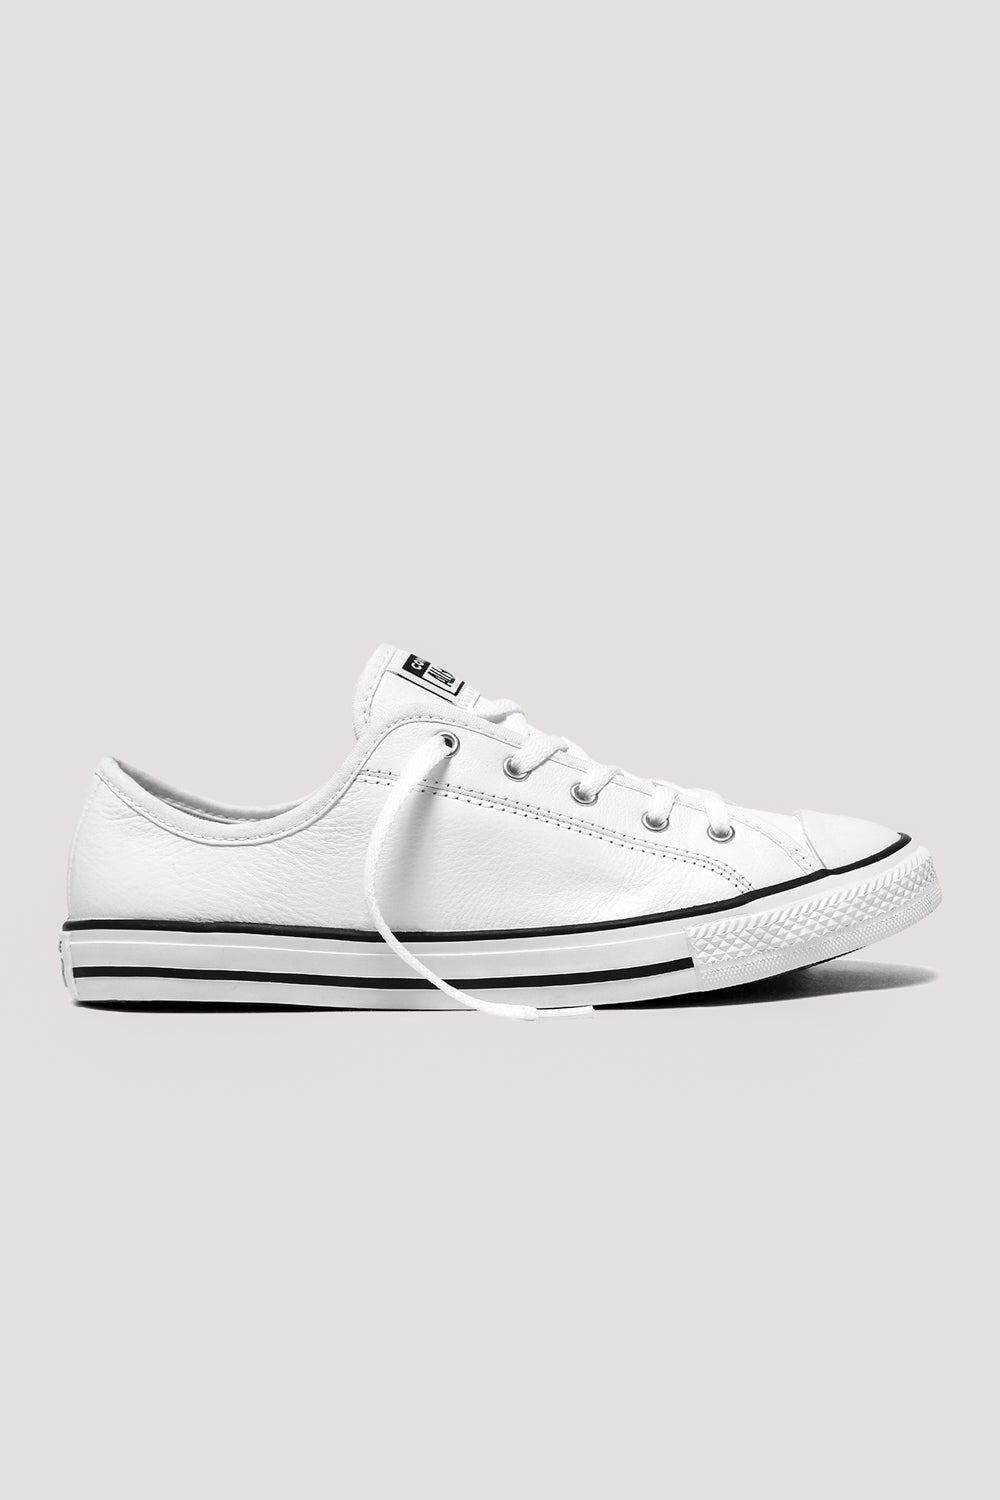 All Star Dainty Leather Shoe | North Beach